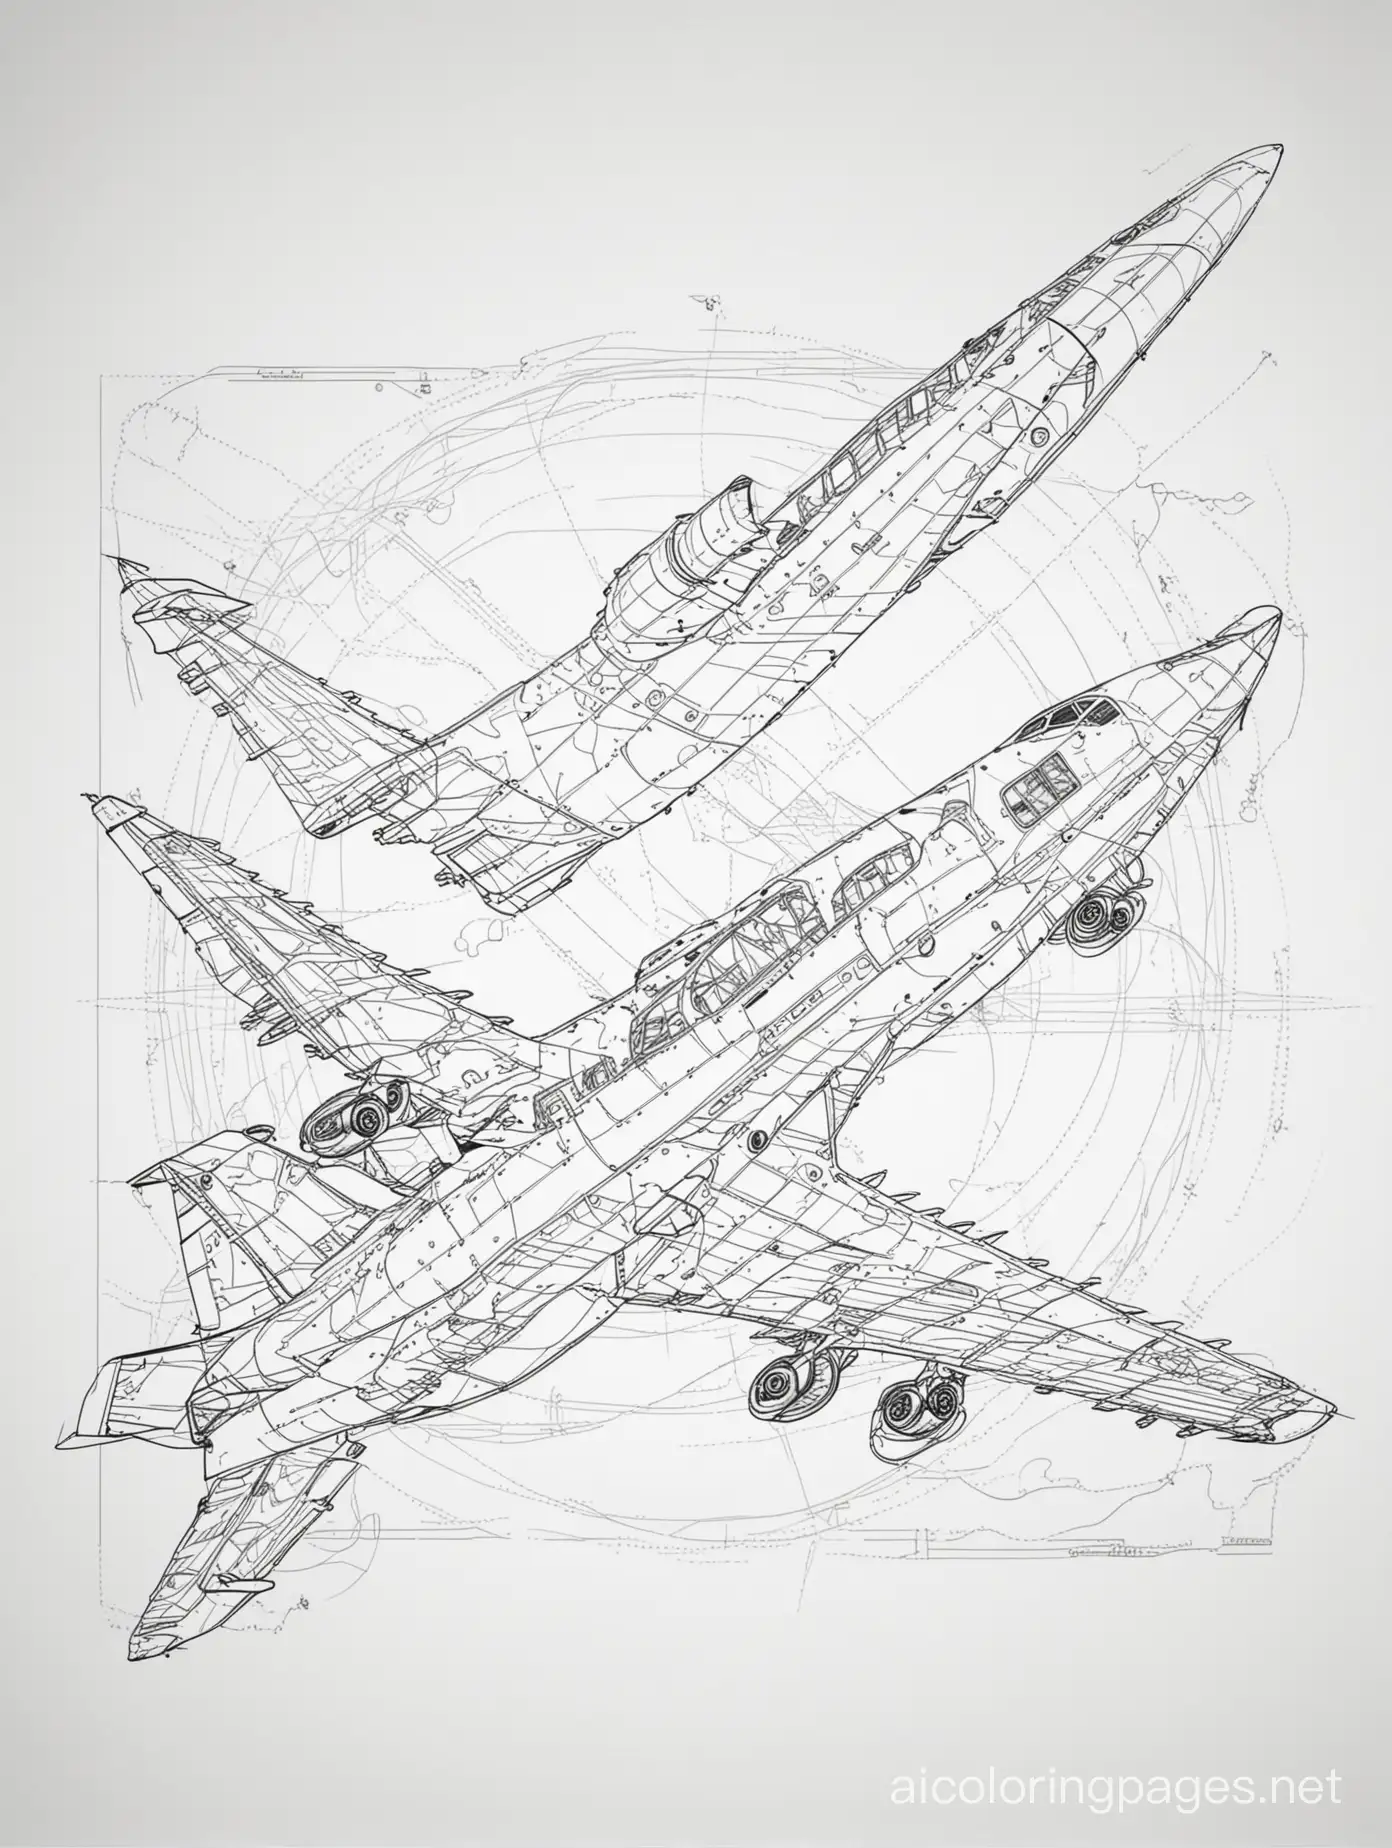 Airplane-Anatomy-Coloring-Page-with-Black-and-White-Line-Art